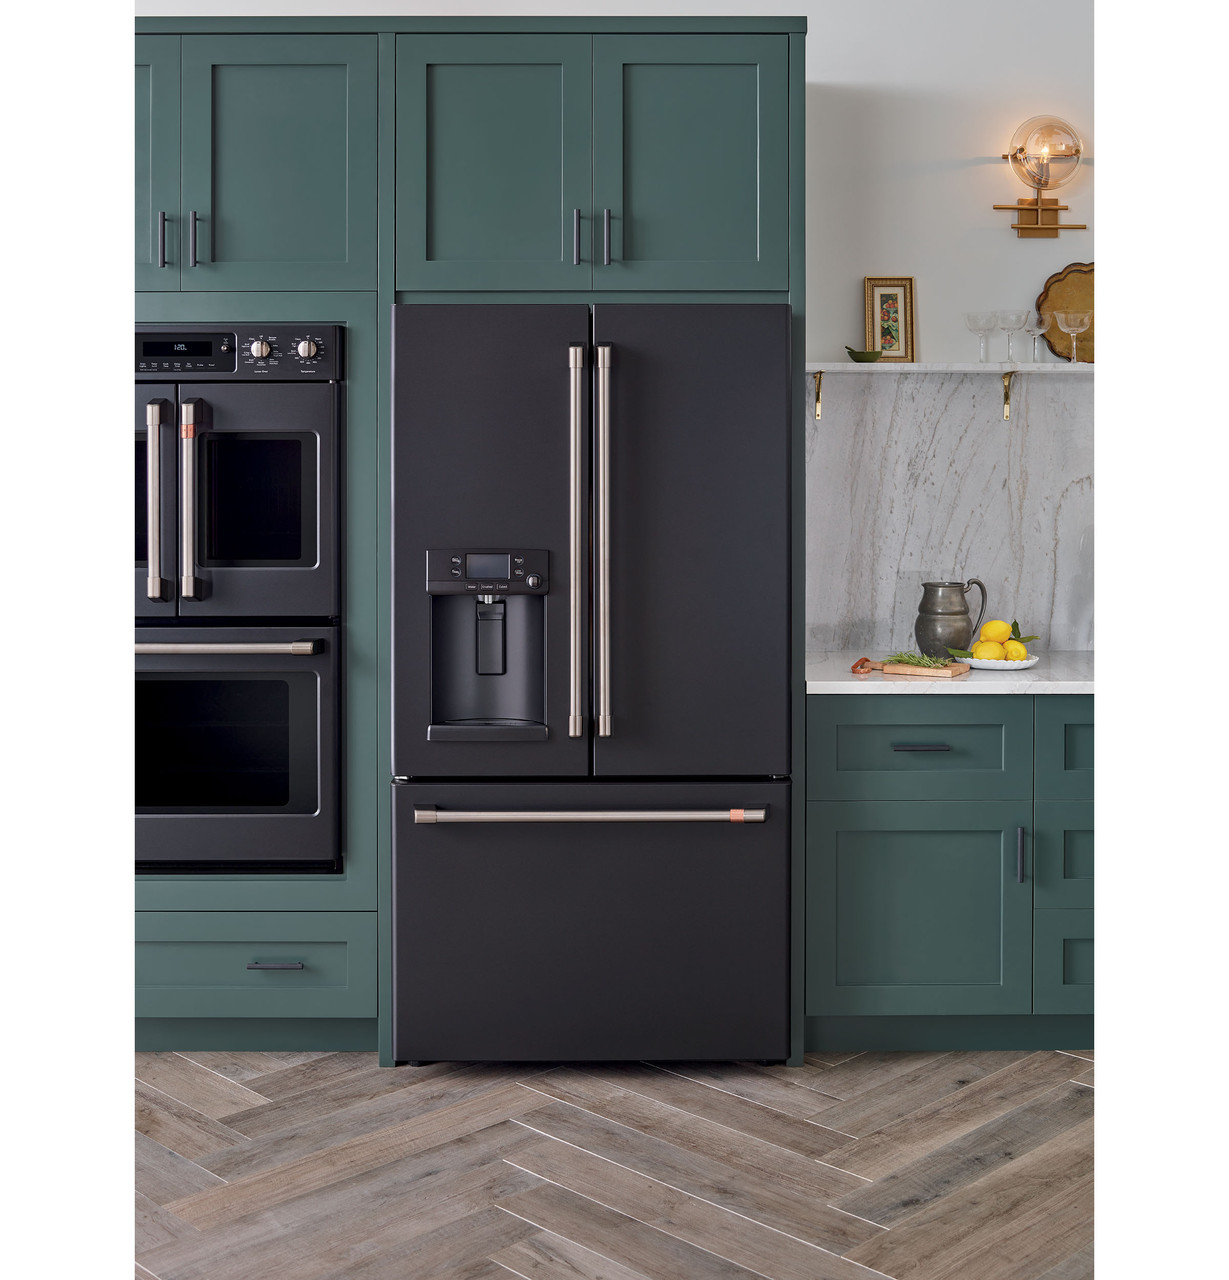 Café™ ENERGY STAR® 22.1 Cu. Ft. Smart Counter-Depth French-Door  Refrigerator with Hot Water Dispenser - CYE22TP3MD1 - Cafe Appliances